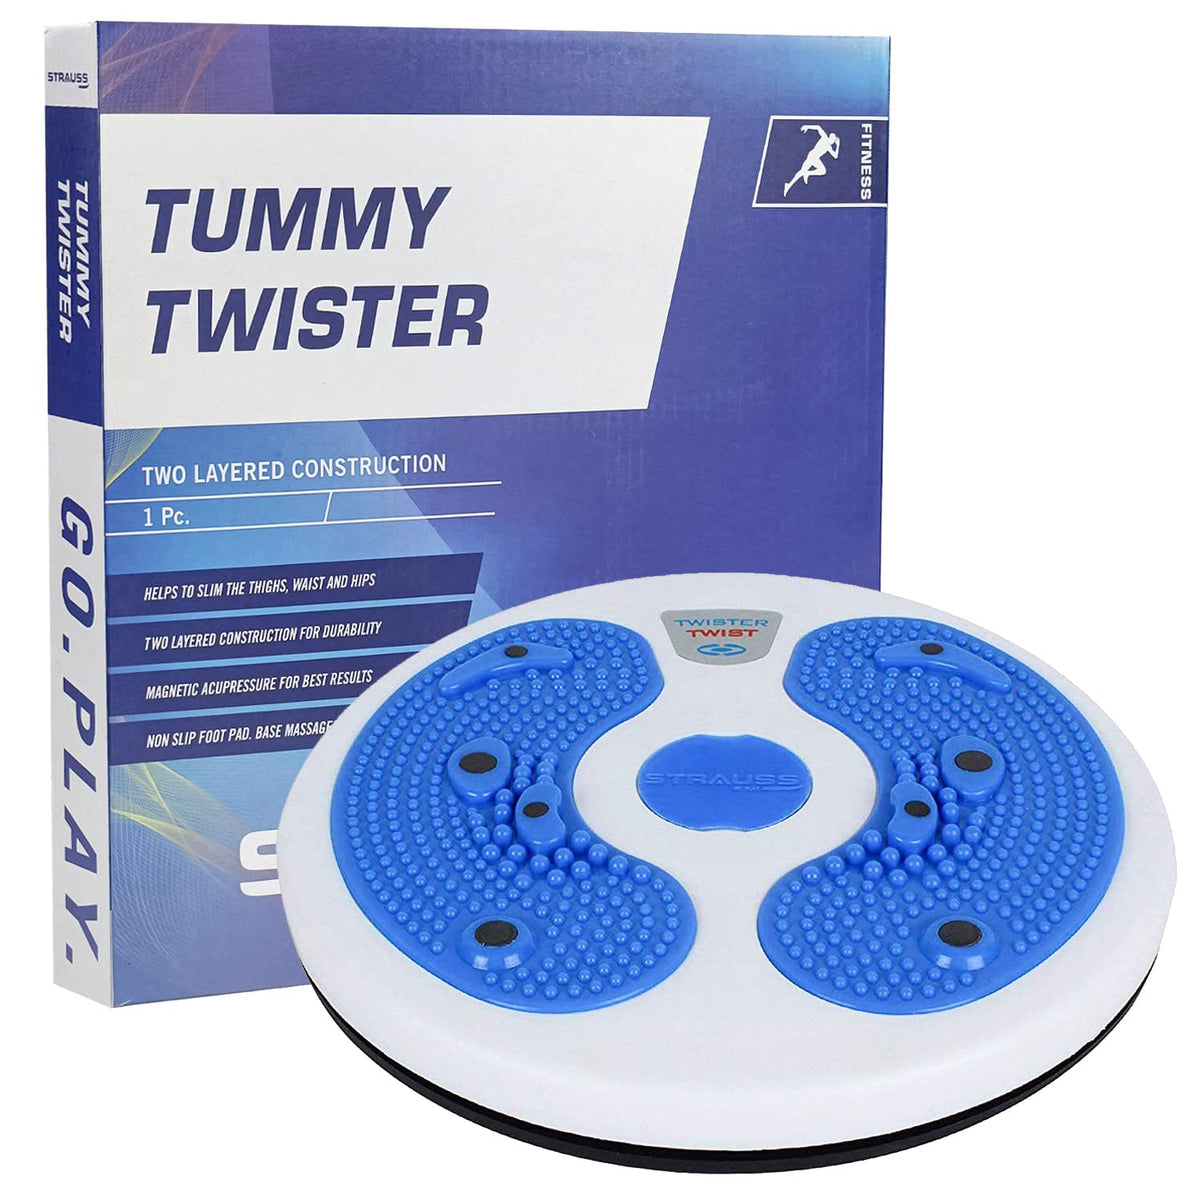 Strauss Tummy Twister and Double Wheel Ab Exerciser With Knee Pad